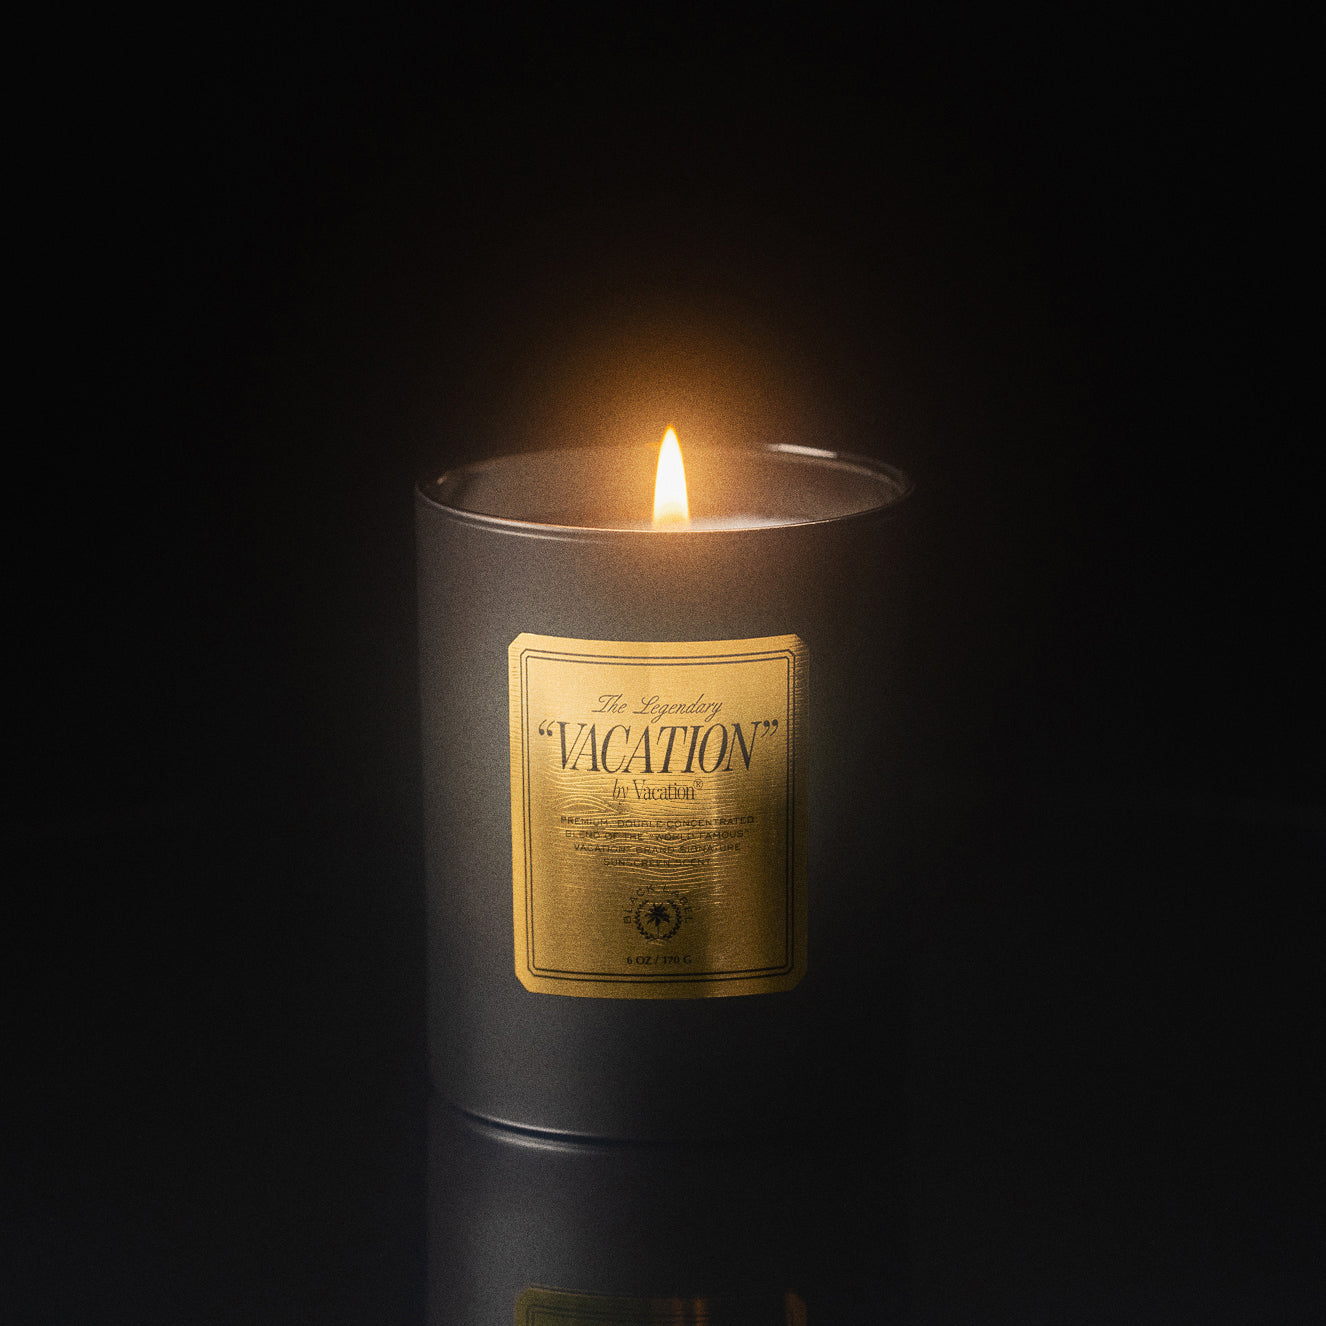 Vacation Black Label Candle Lit